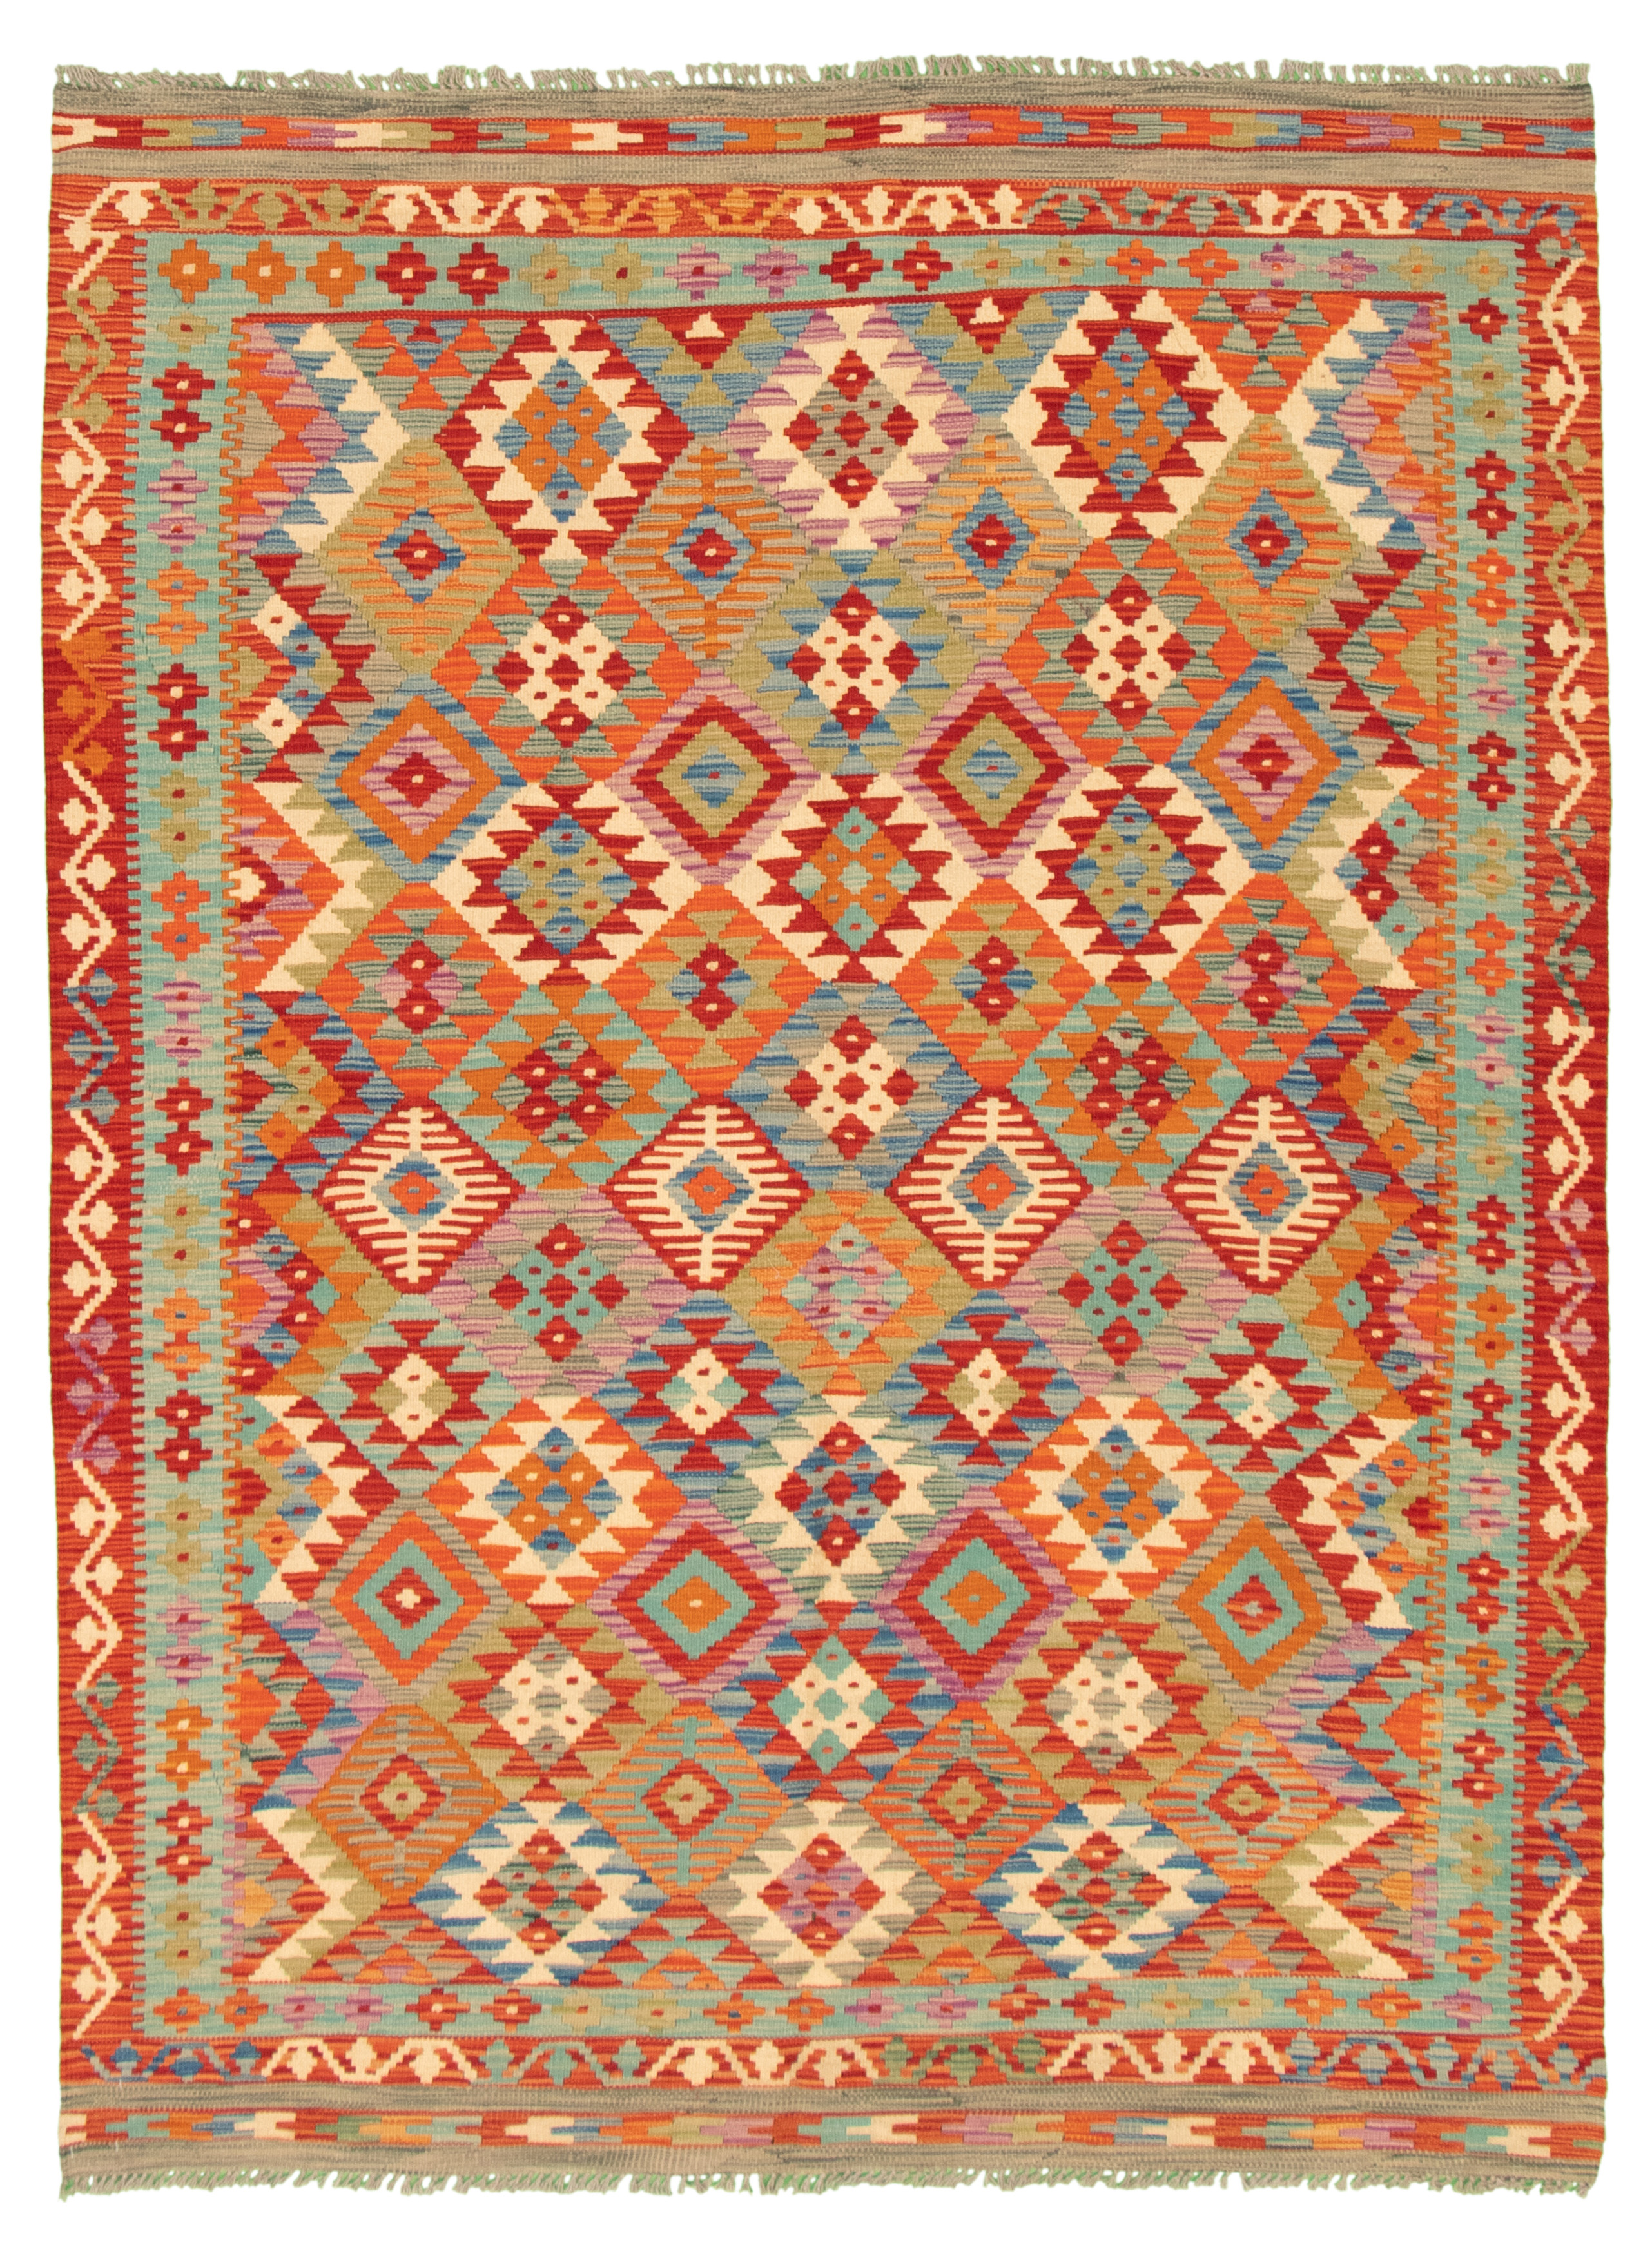 Hand woven Bold and Colorful  Dark Red Wool Kilim 5'10" x 7'10" Size: 5'10" x 7'10"  